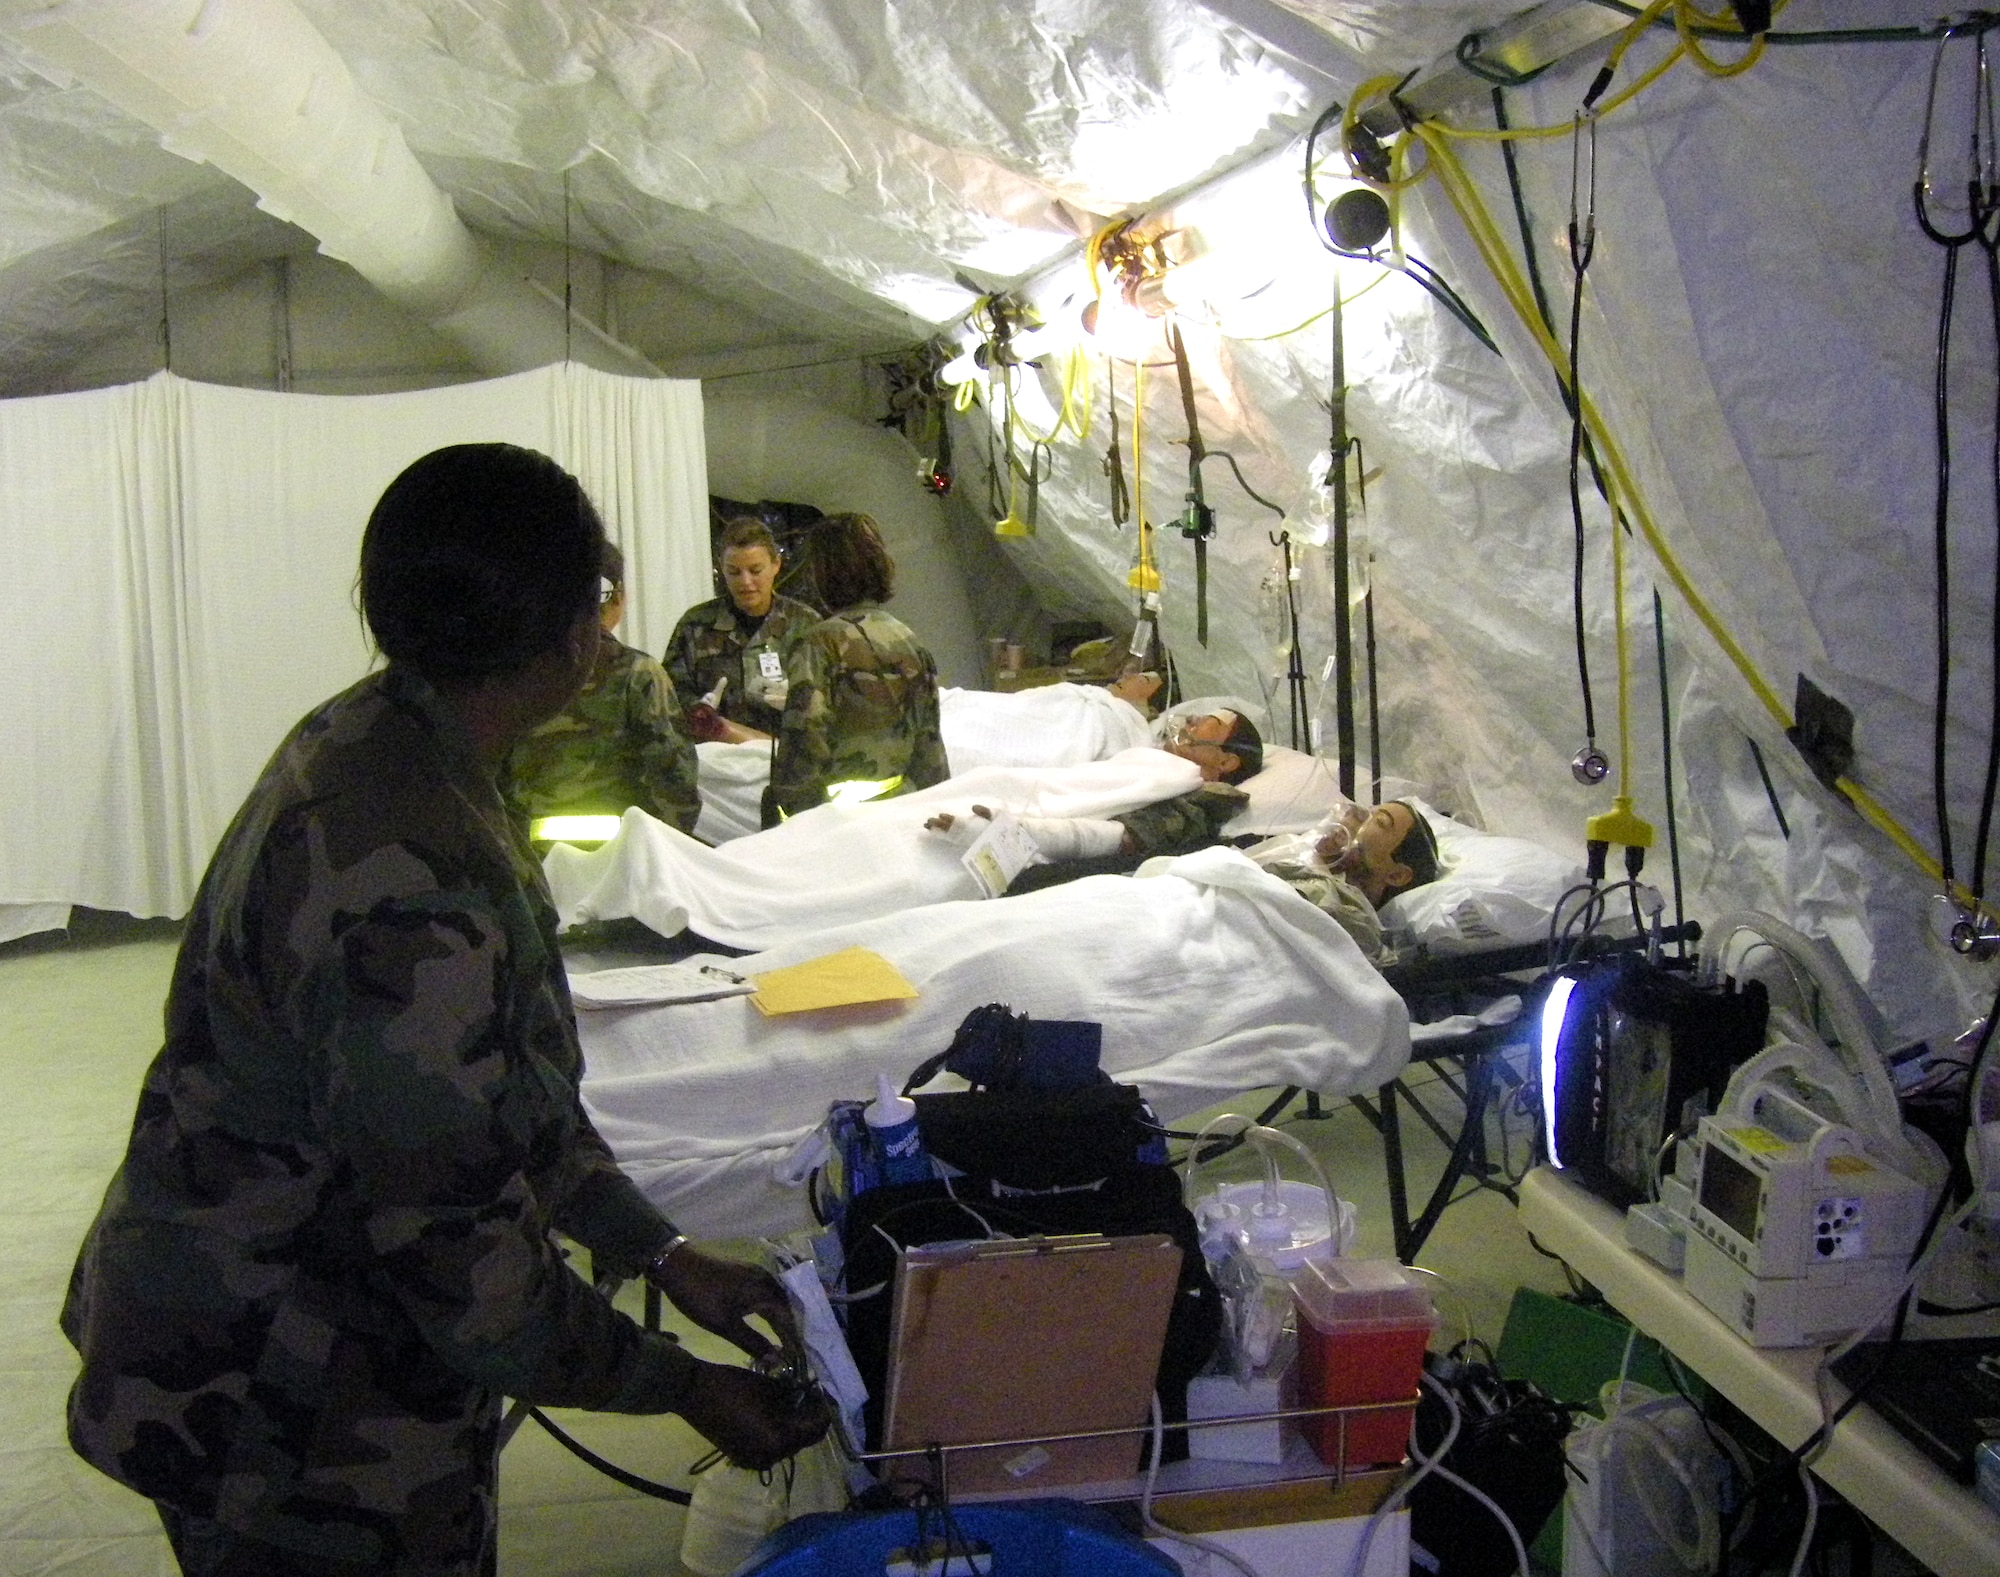 Contingency Aeromedical Staging Facility personnel at Pacific Lifeline 2008, a joint-service exercise at Barking Sands Pacific Missile Range, Kauai, Hawaii, care for simulated patients after being trained by the 381st Training Squadron's CASF Mobile Training Course. The couse is the first of its type to be certified by both Air Education and Training Command and Air Mobility Command. (U.S. Air Force photo)